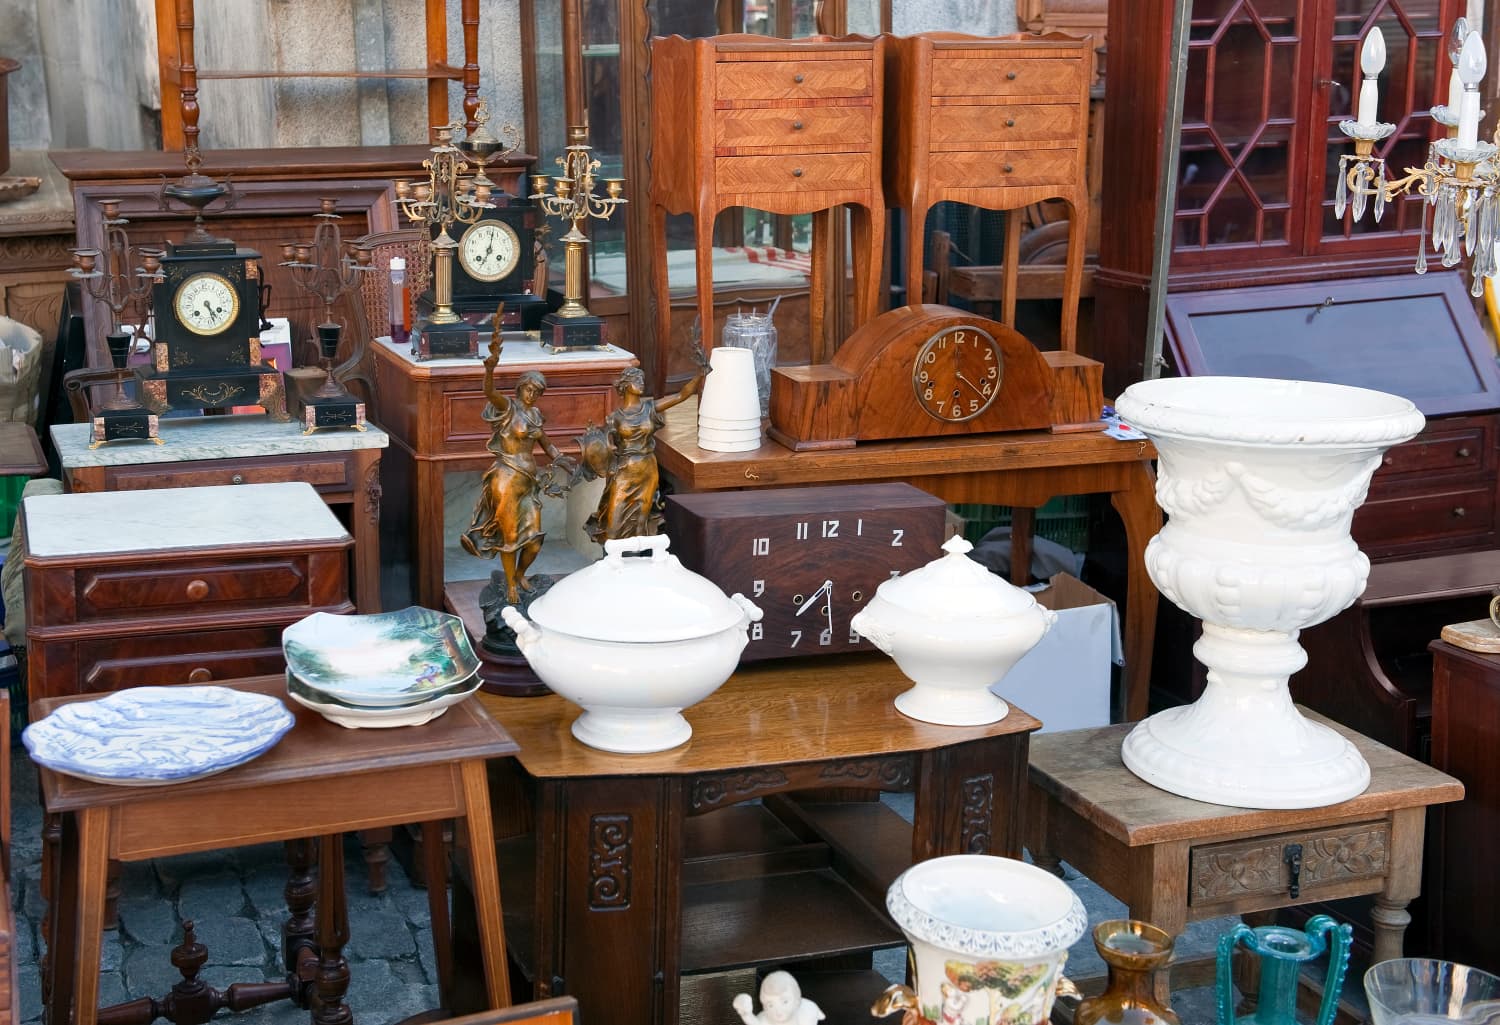 Things You Should Always Buy at Estate Sales, According to the Experts